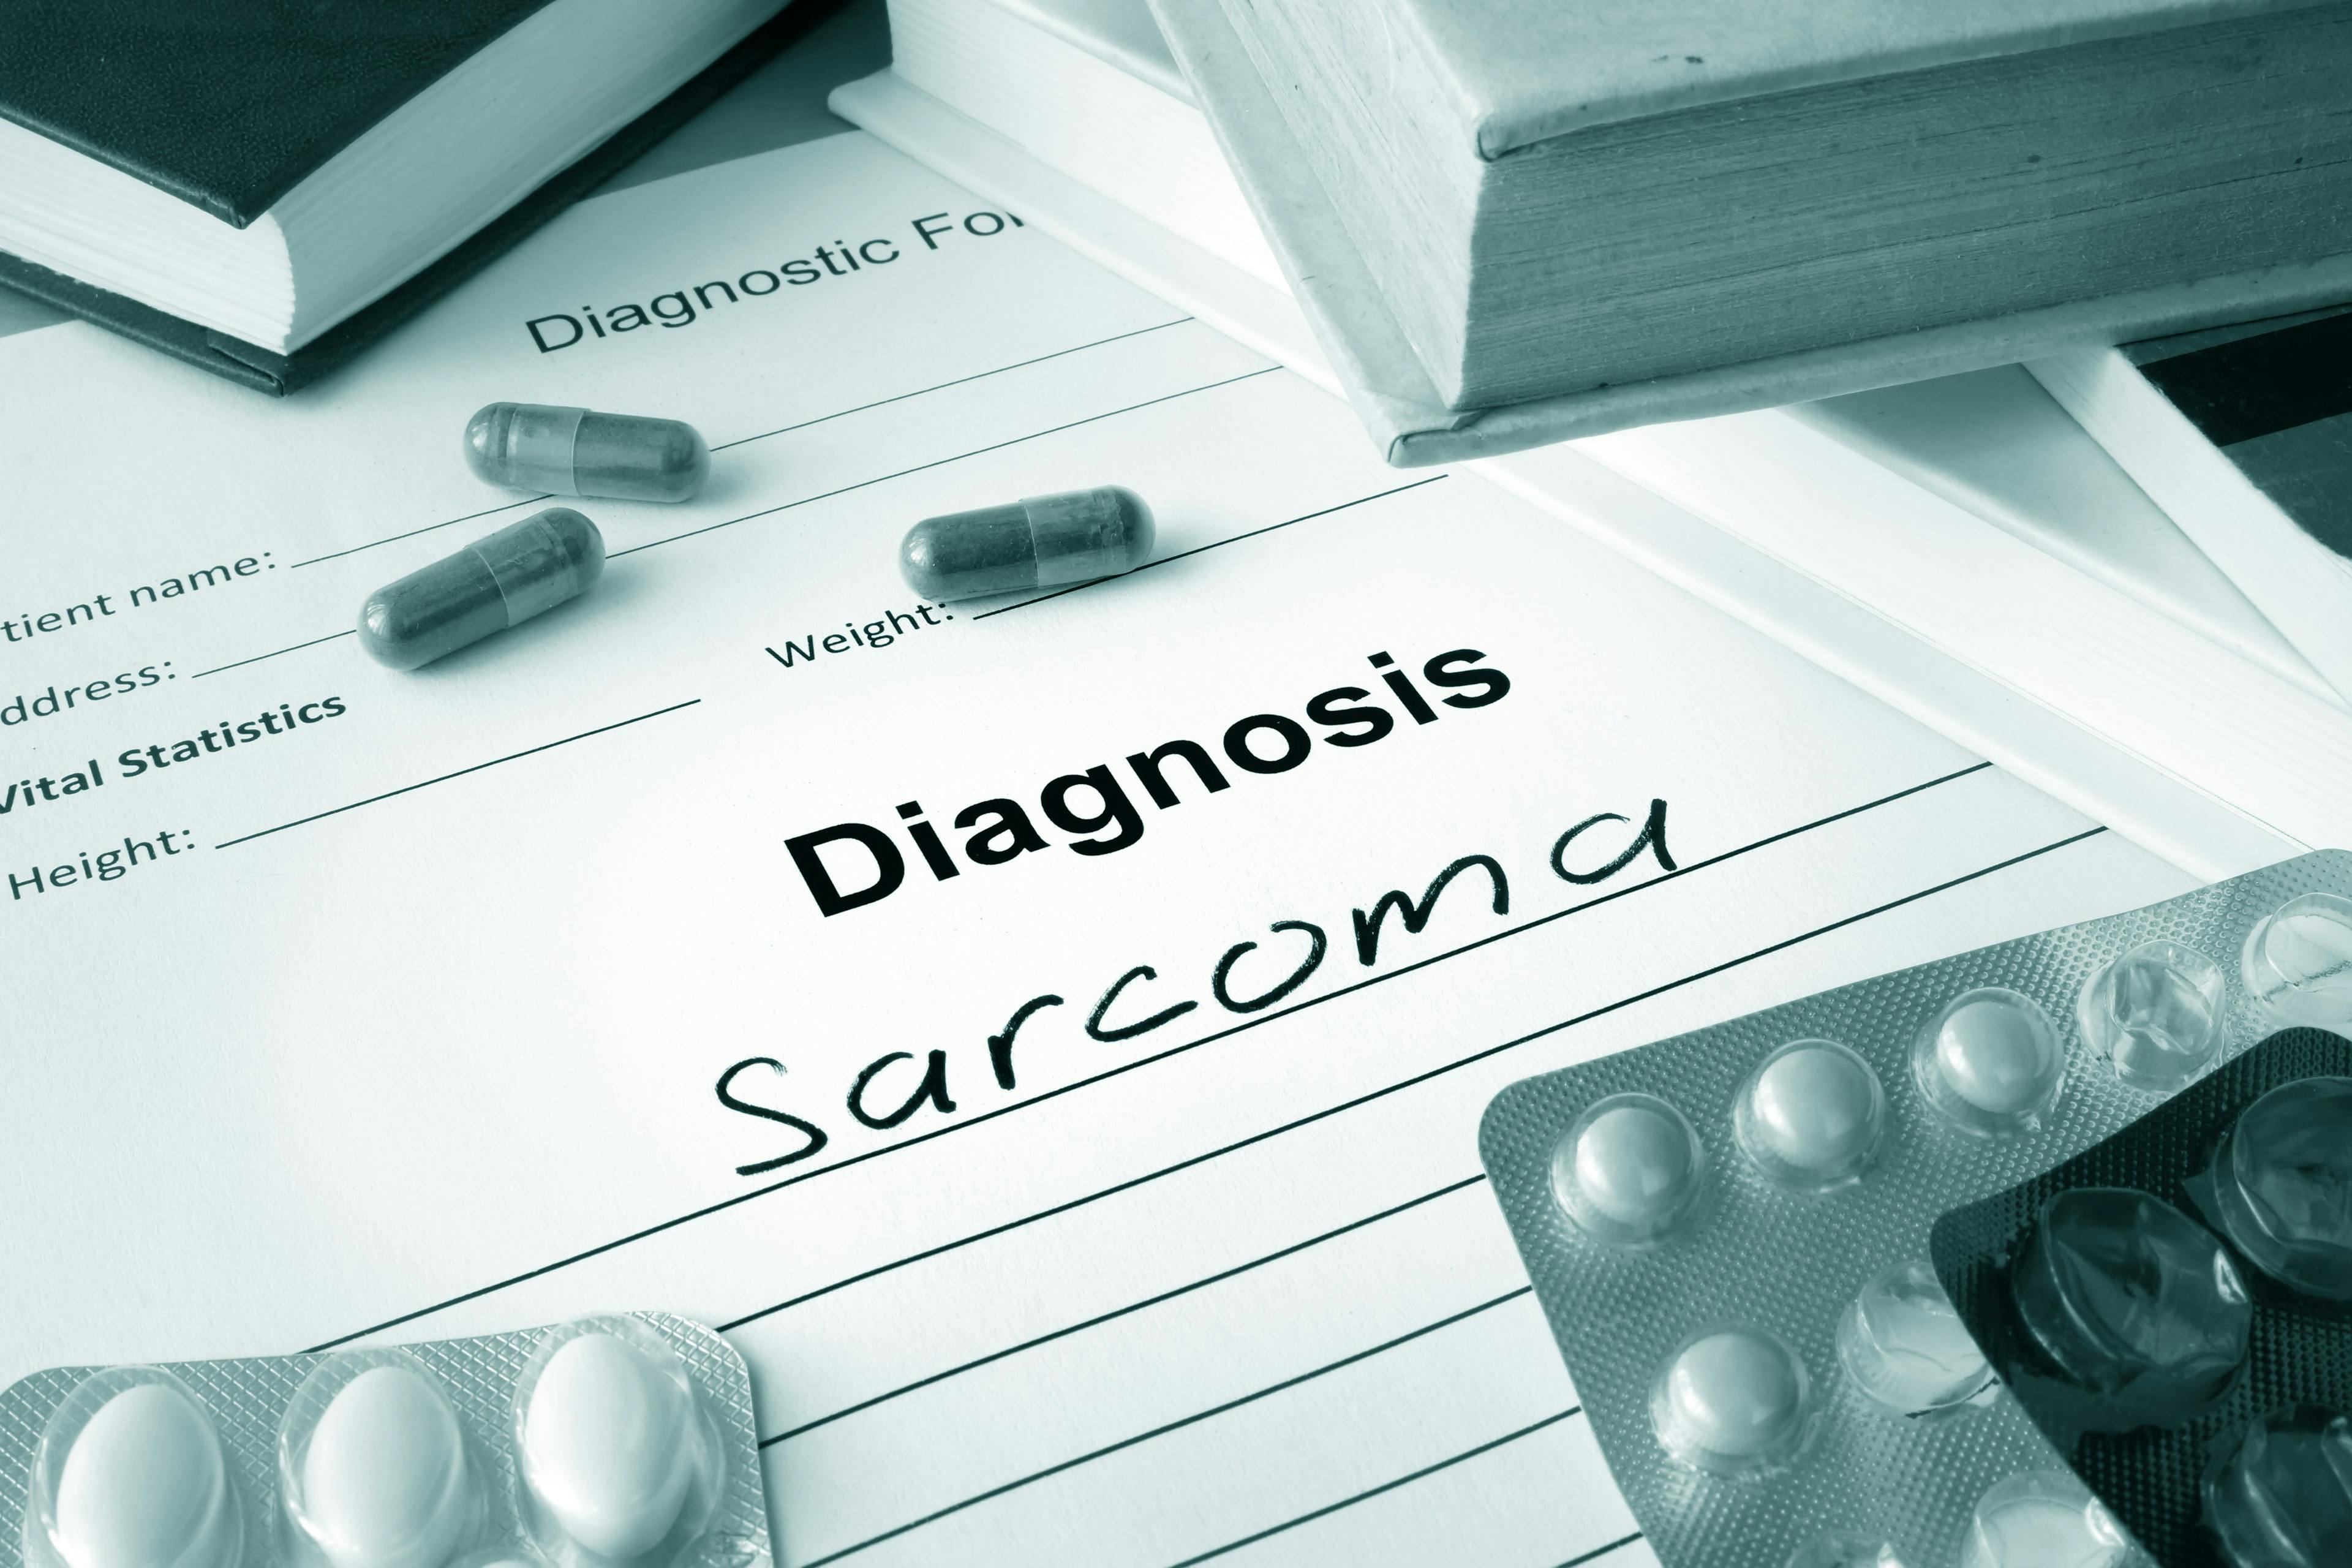 diagnostic form with the words "diagnostic: sarcoma" written on it, surrounded by pills